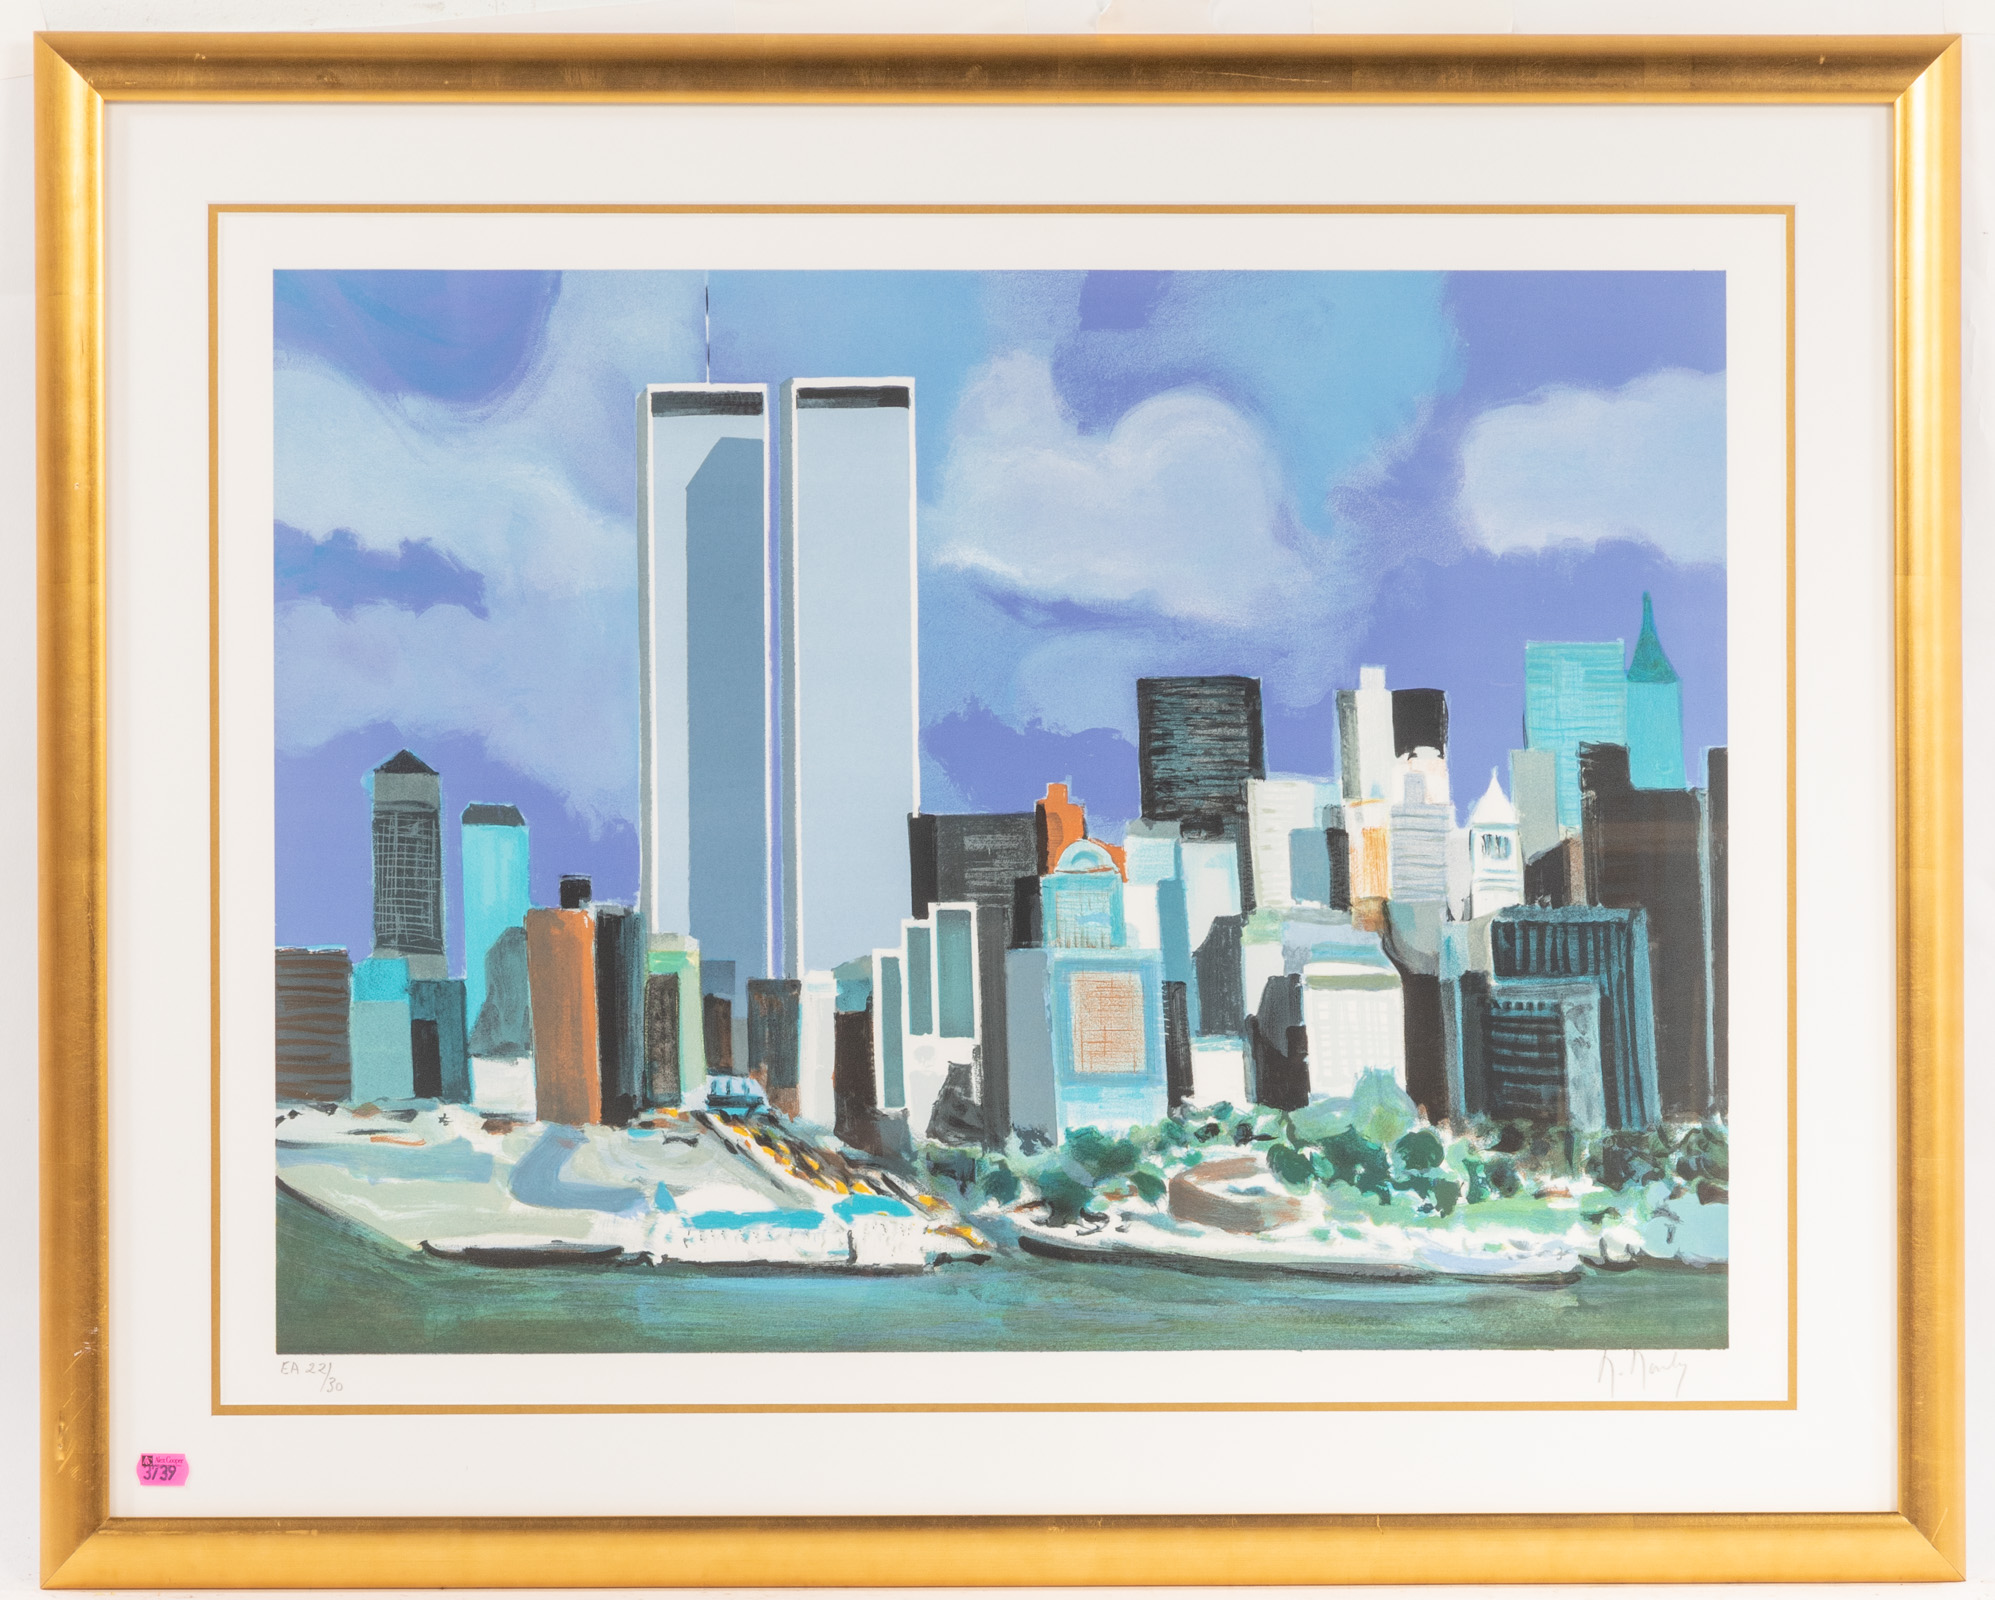 MARCEL MOULY. "TWIN TOWERS," SERIGRAPH